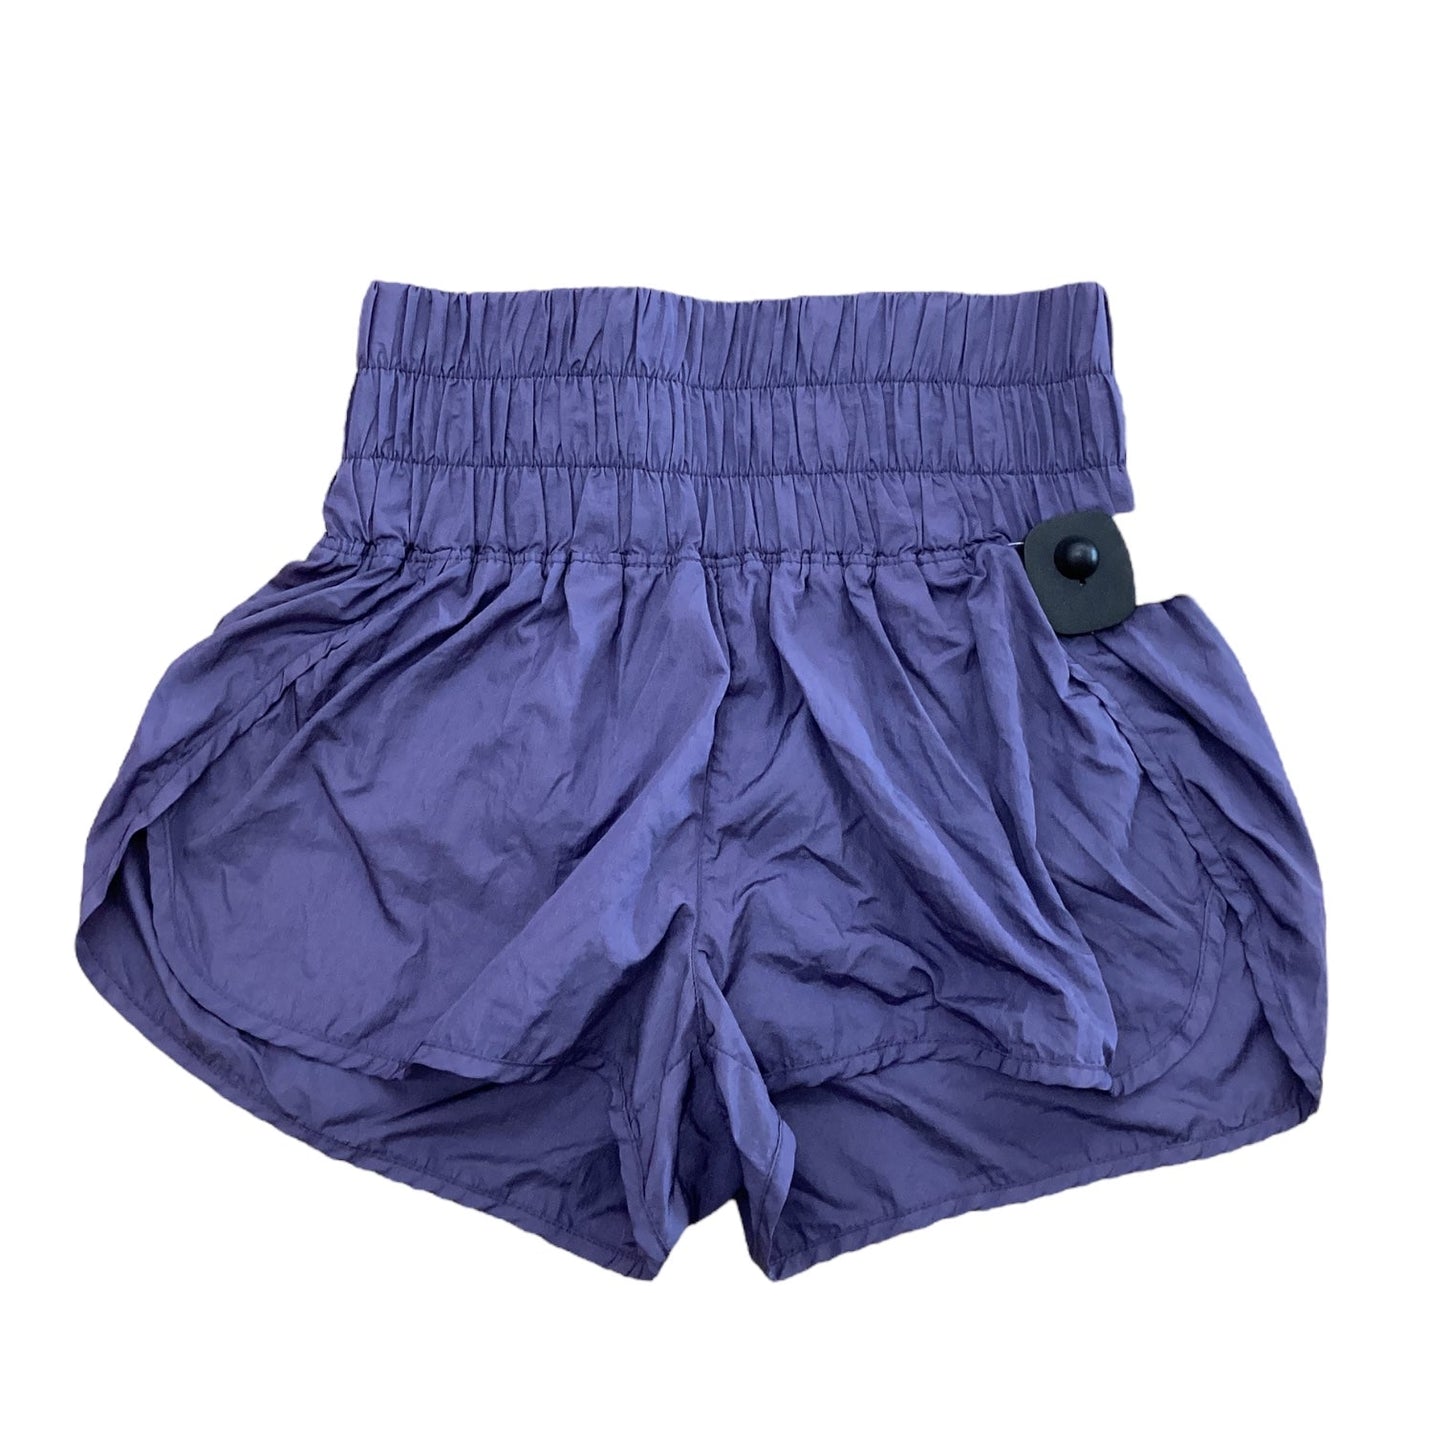 Purple Athletic Shorts Free People, Size S